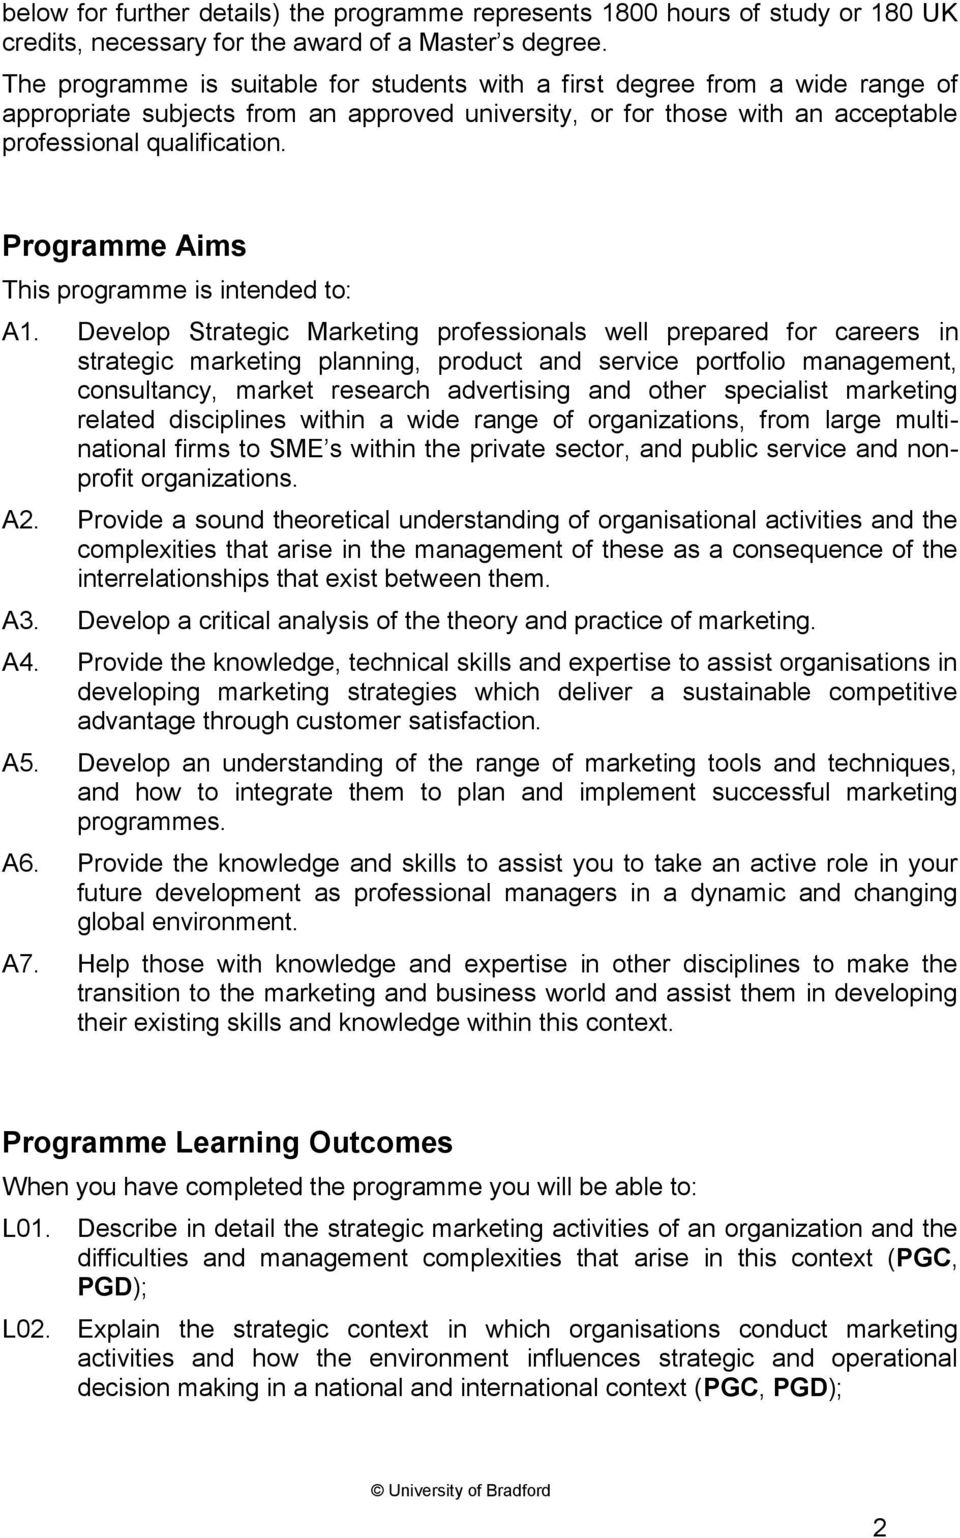 Programme Aims This programme is intended to: A1.